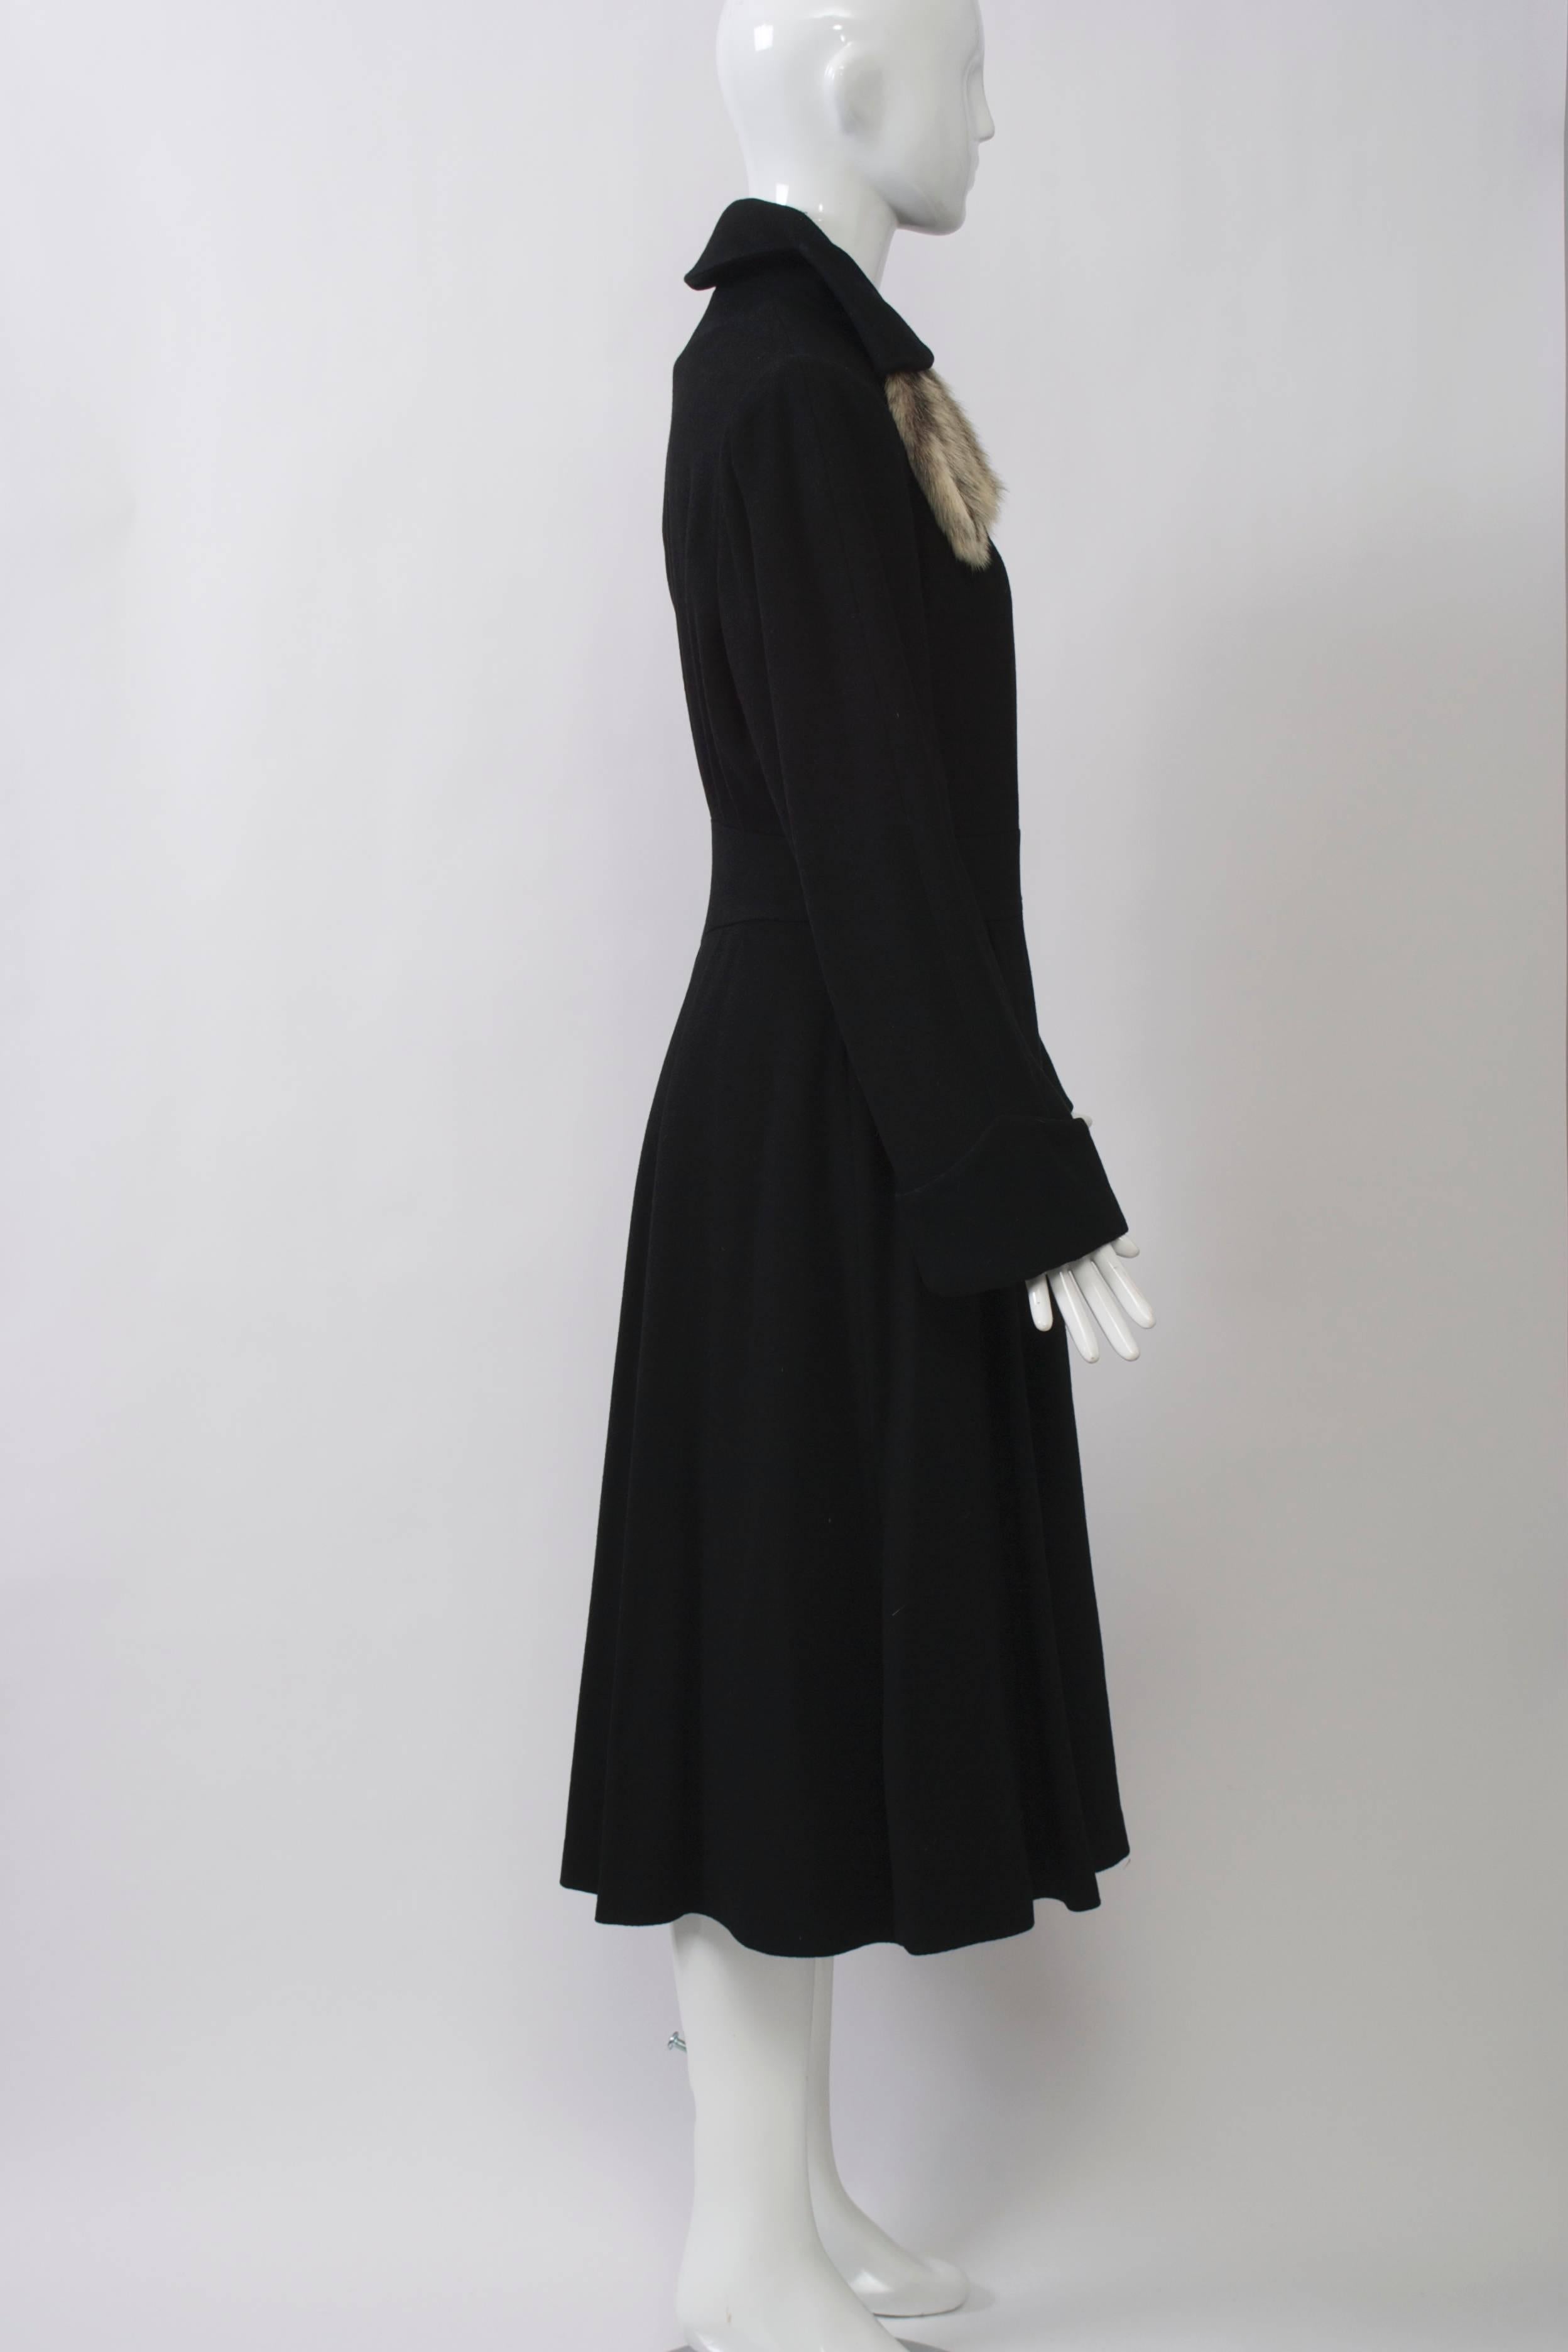 Wonderful detailing on this black wool coat featuring an inset waistband and high collar with fur tails. Other interesting details are the back pleats and pointed cuffs. Approximate size 6.